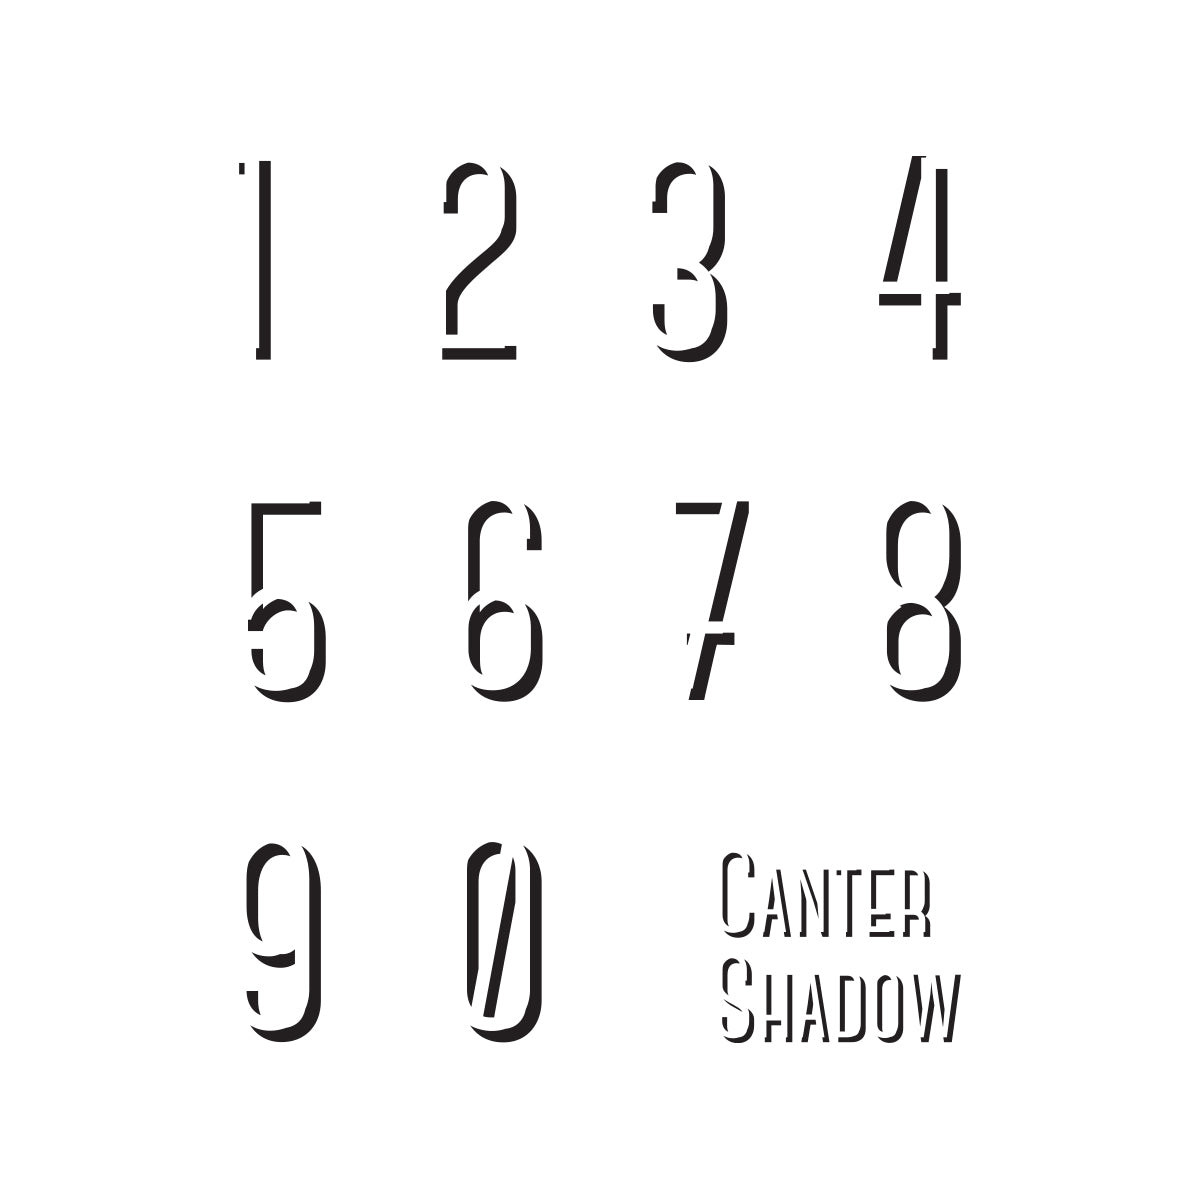 Circle-Canter Shadow Number.